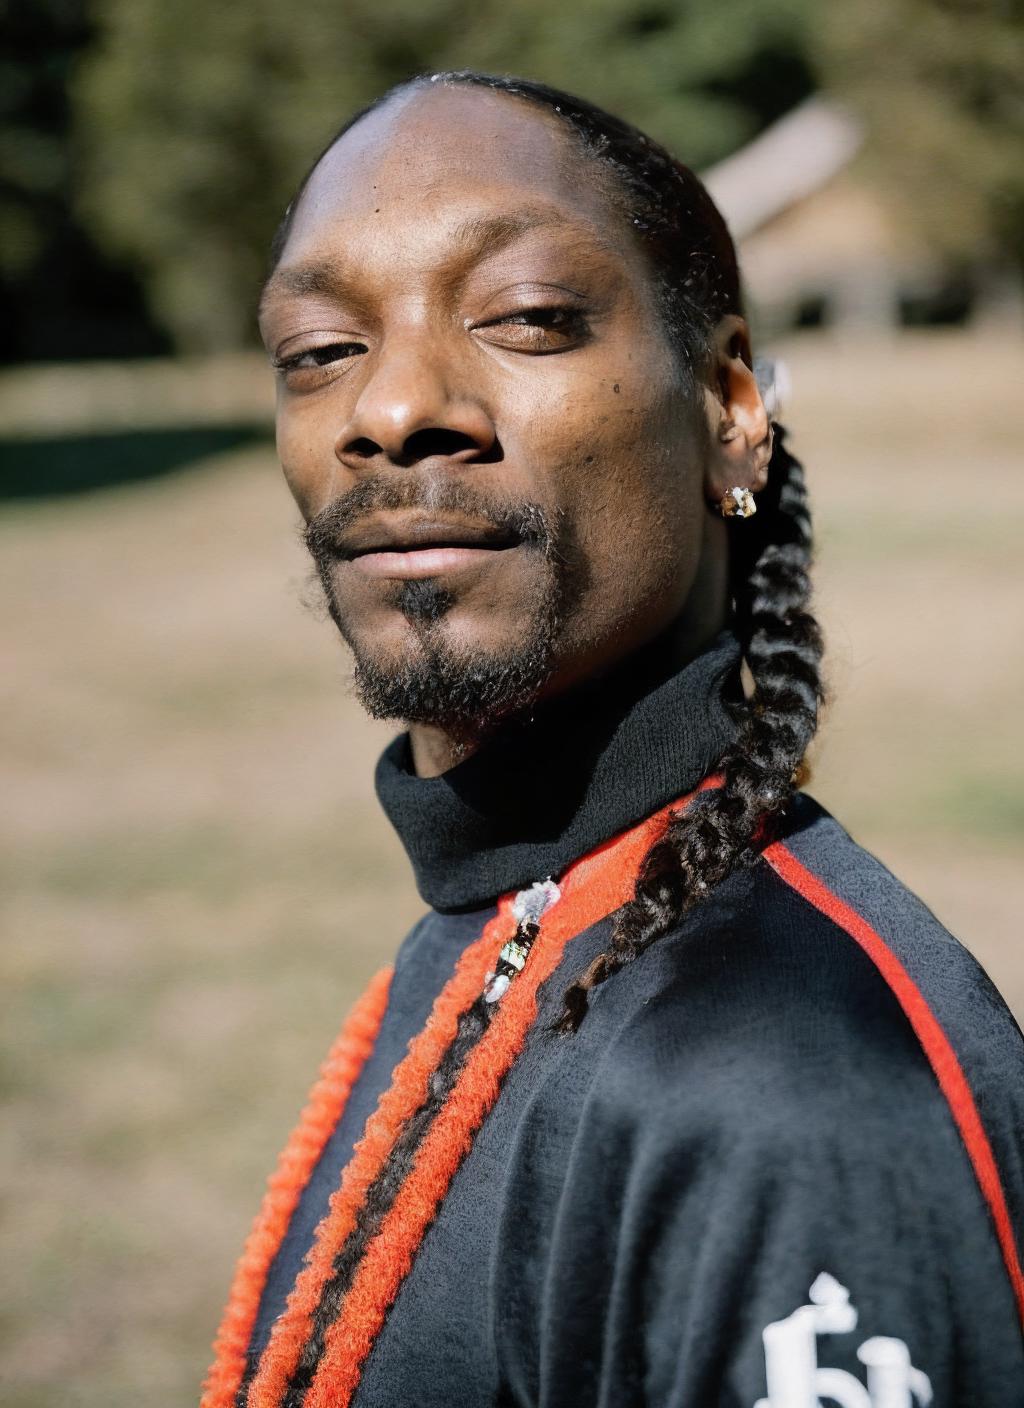 A Man with Braids and Red Tassles Staring at the Camera.